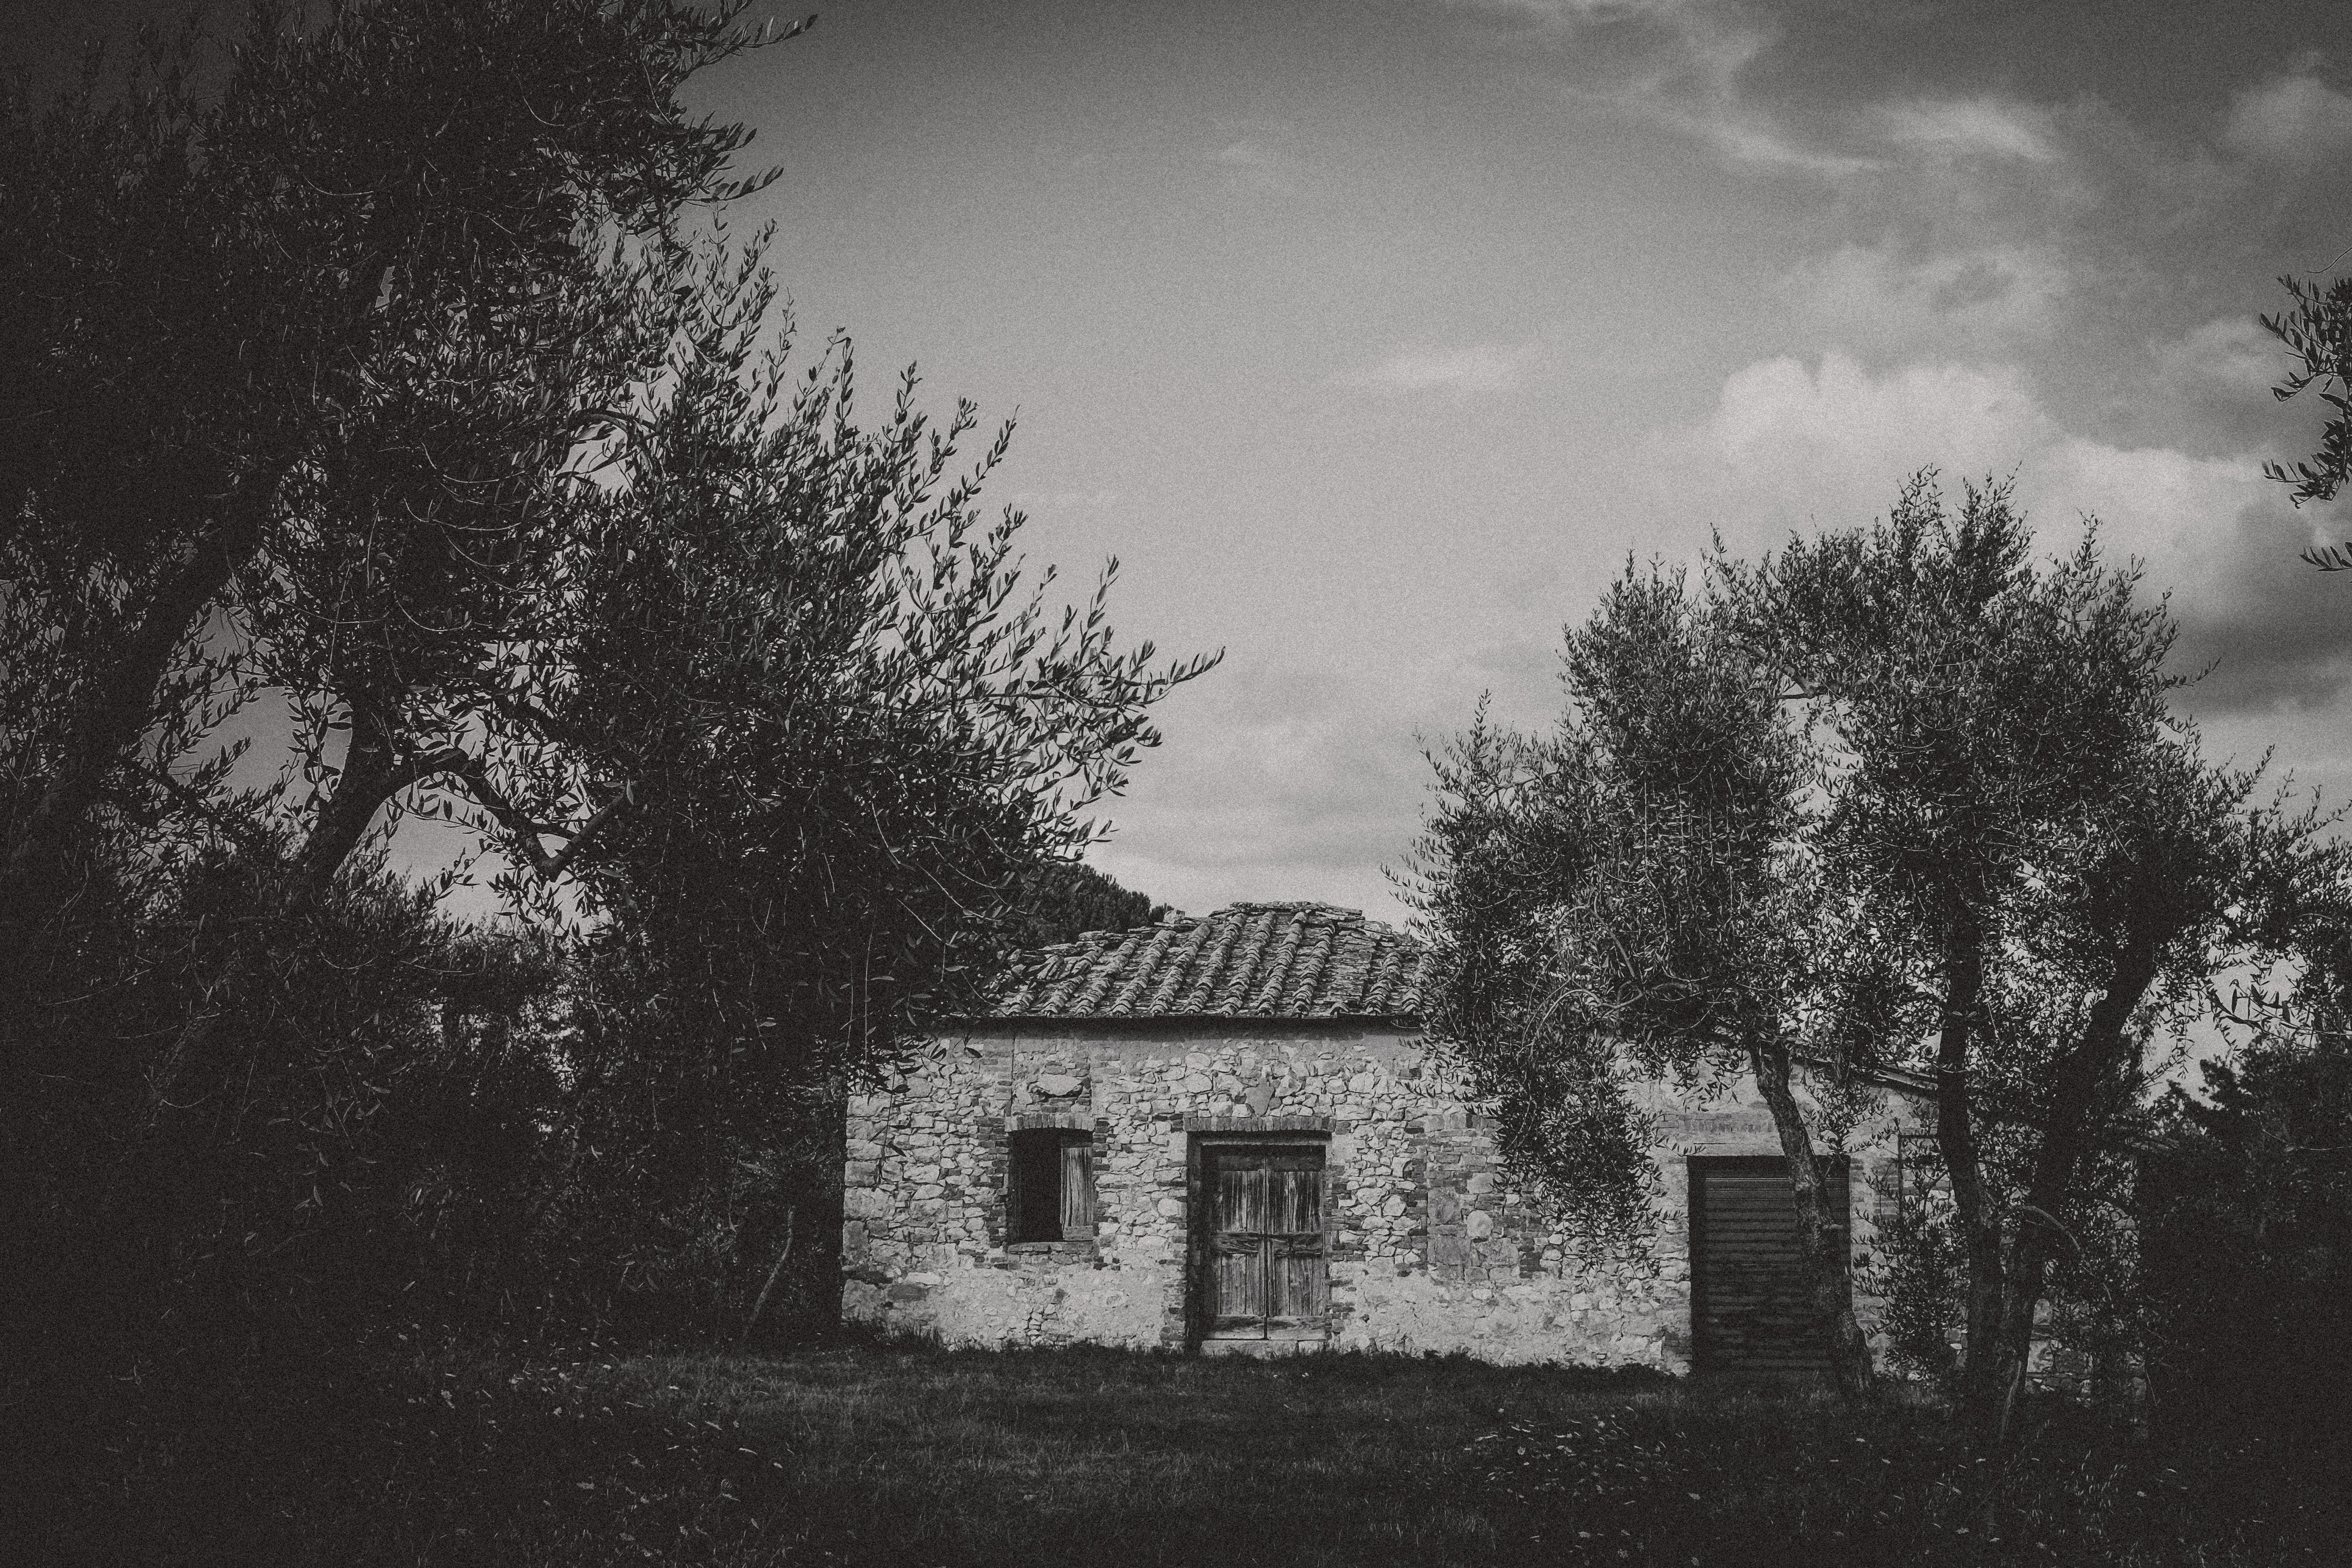 Abandoned cottage in Tuscan countryside - Notice the Space